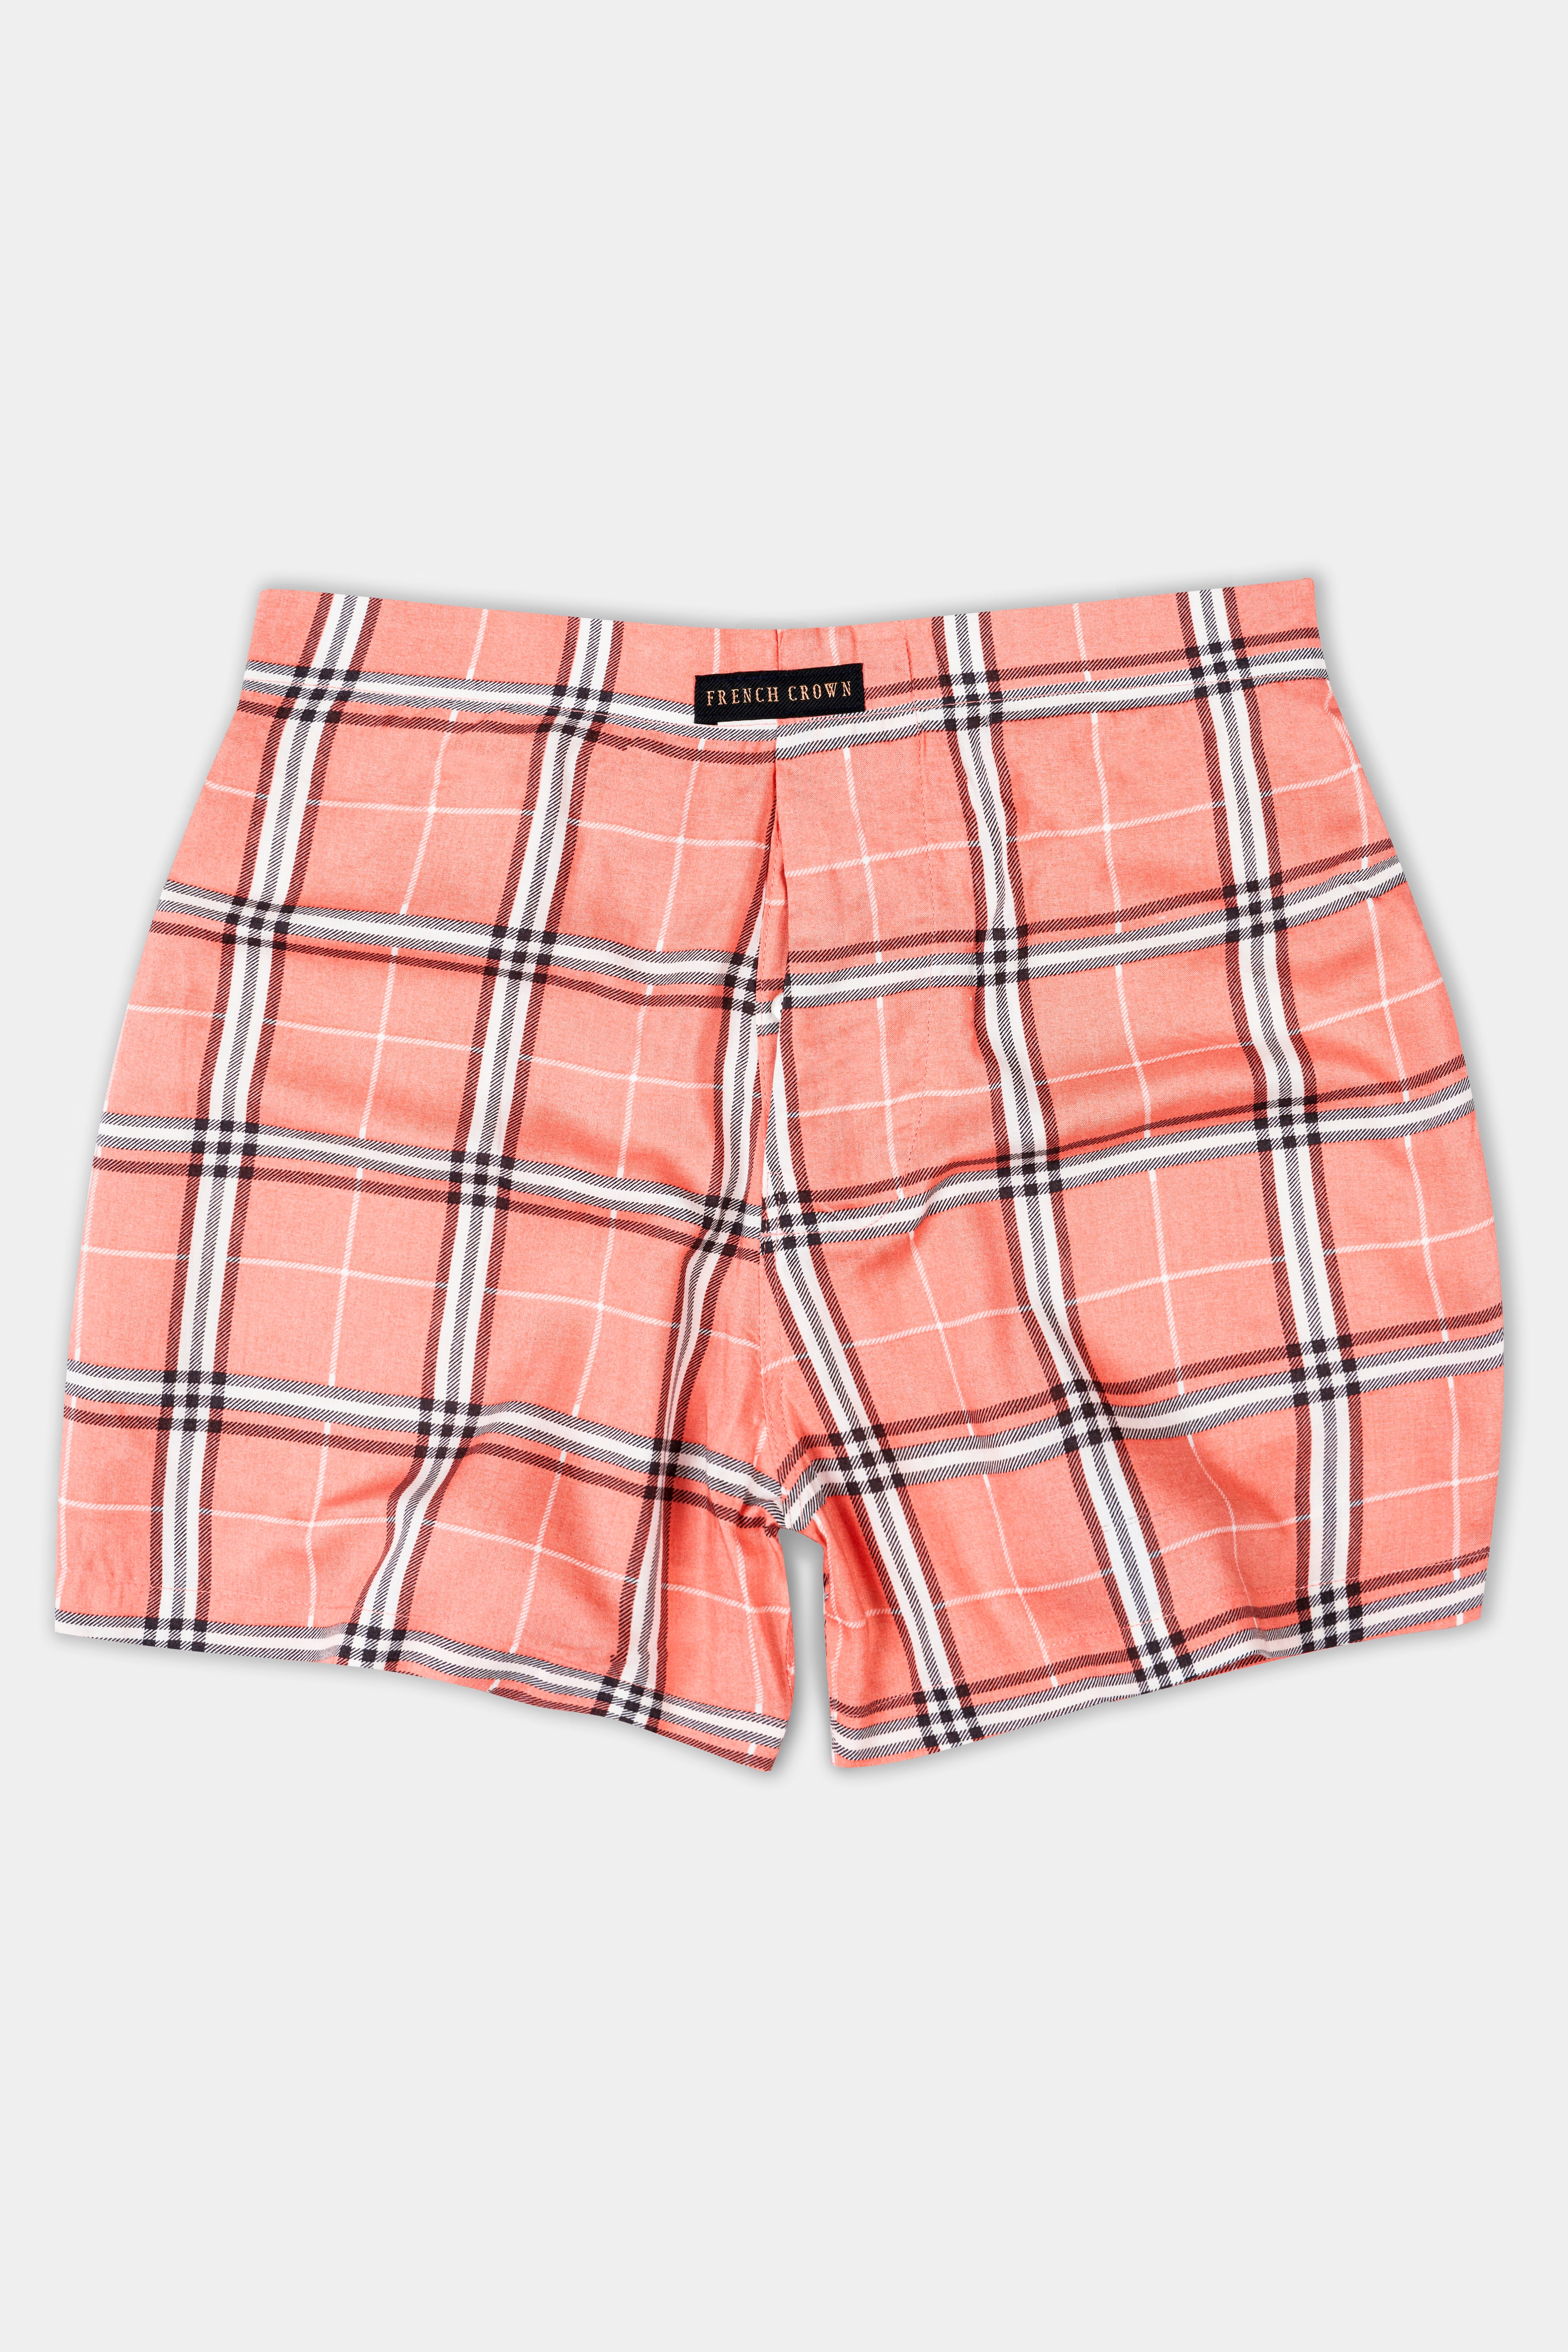 Bud Orange With Hickory Brown And White Checkered Premium Tencel Boxer BX536-28, BX536-30, BX536-32, BX536-34, BX536-36, BX536-38, BX536-40, BX536-42, BX536-44